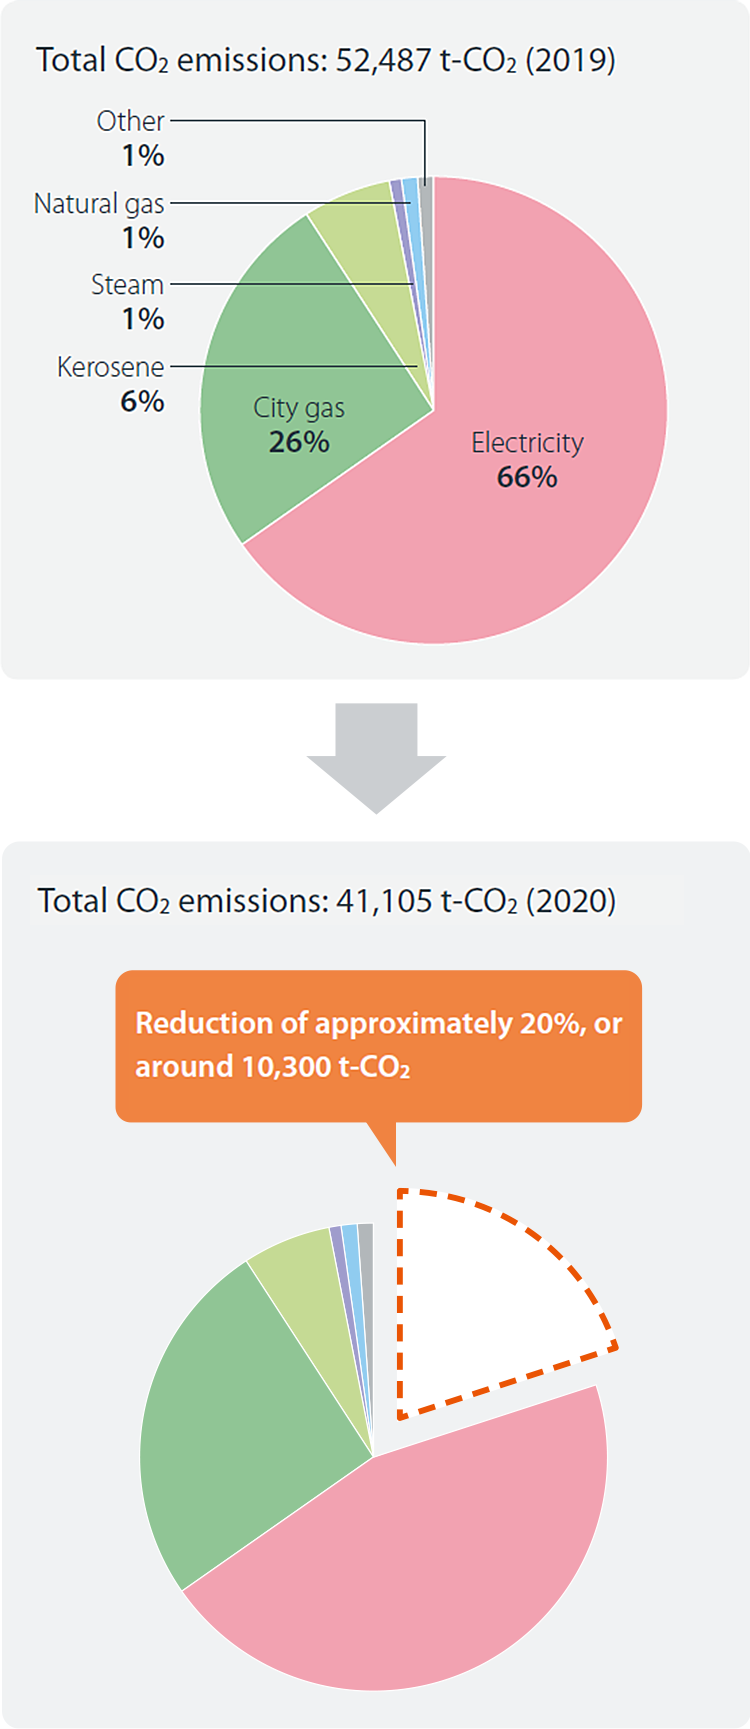 Total CO2 emissions: 52,487t-CO2 (2019) (Electricity 66%, City gas 26%, Kerosene 6%, Steam 1%, Natural gas 1%, Other 1%) to Total CO2 emissions: 41,105t-CO2 (2020) (Reduction of approximately 20%, or around 10,300t-CO2)